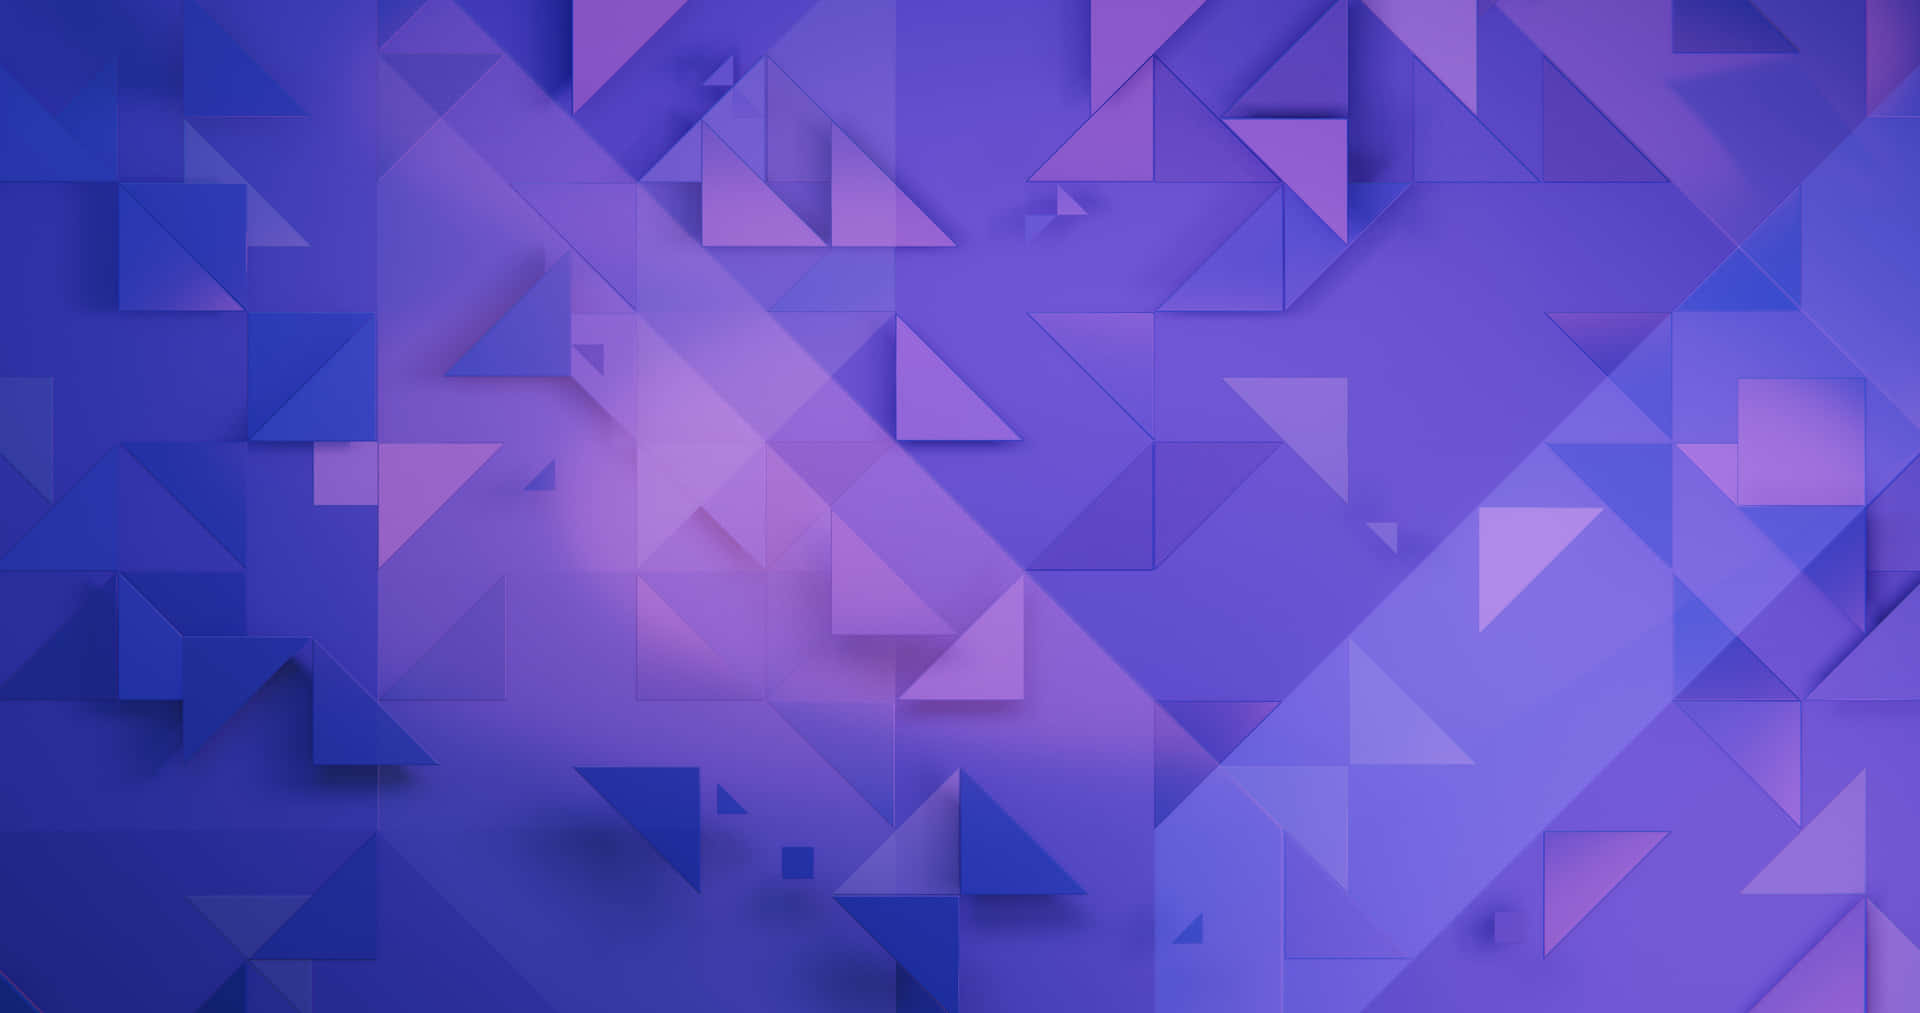 An abstract and vibrant view of Blue and Purple on Digital Desktop Wallpaper